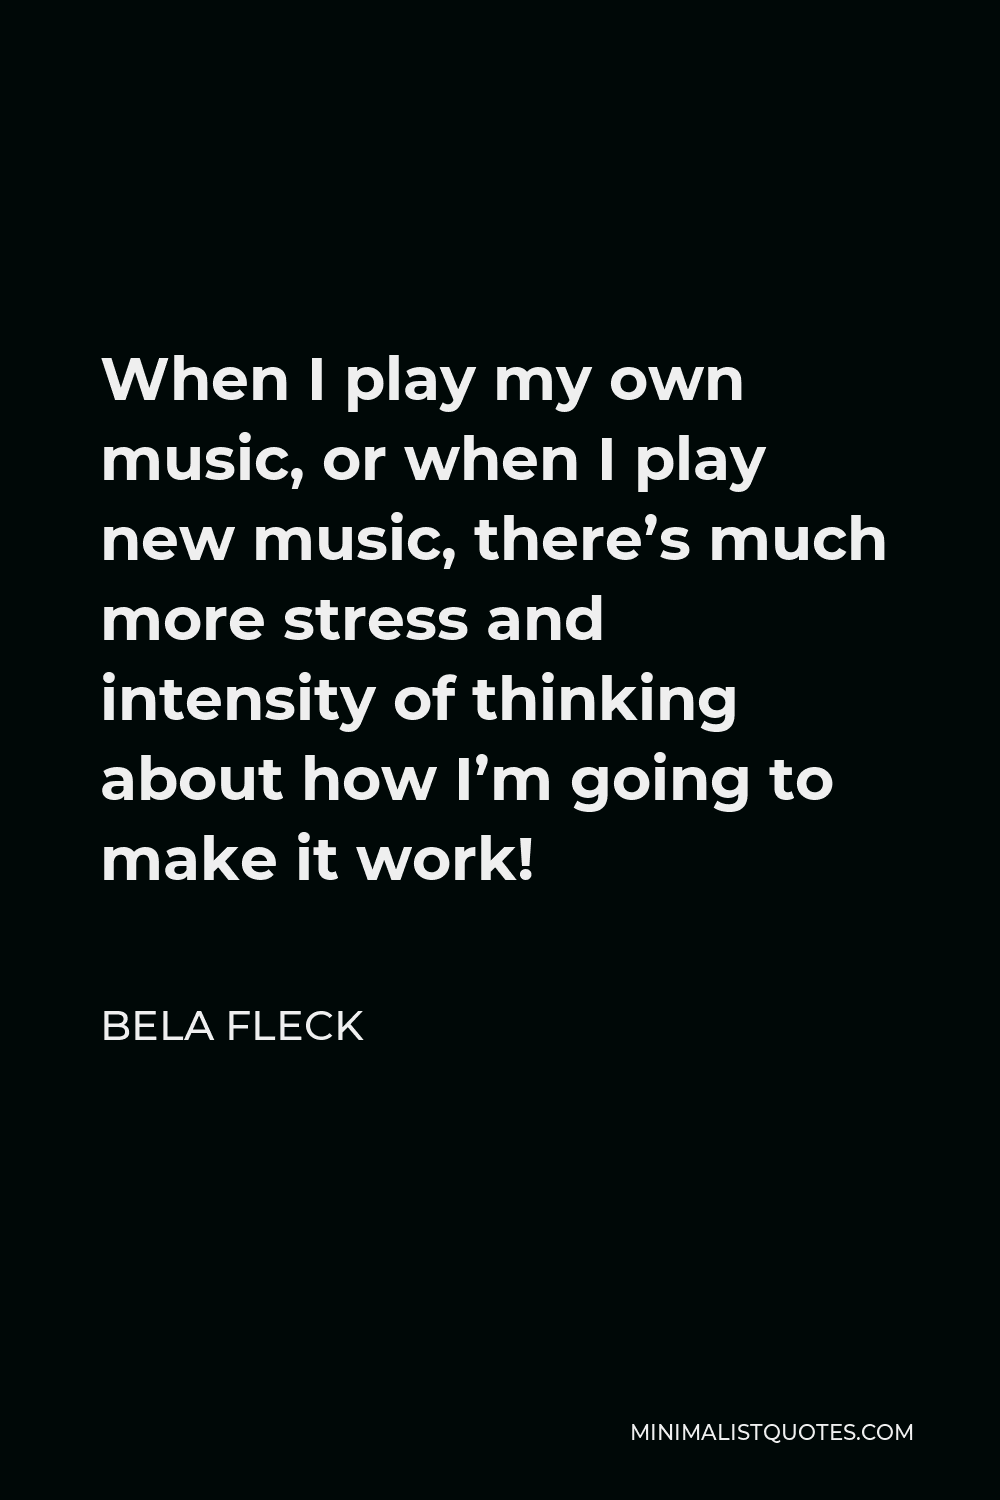 Bela Fleck Quote - When I play my own music, or when I play new music, there’s much more stress and intensity of thinking about how I’m going to make it work!